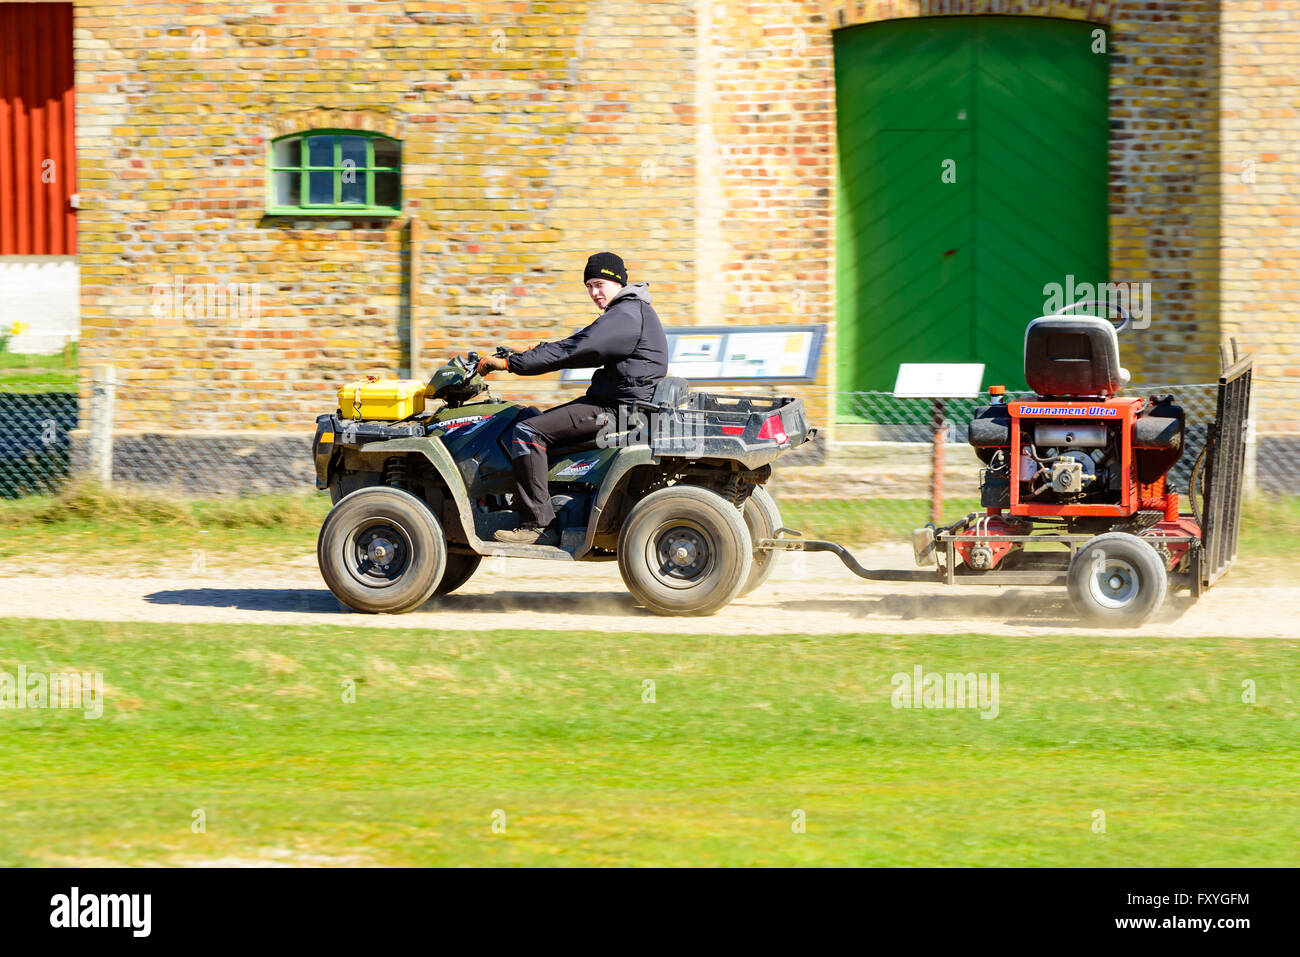 Falsterbo, Sweden - April 11, 2016: Young adult male driving a Polaris Sportsman 550 awd with a trailer on a dirt road. Stock Photo